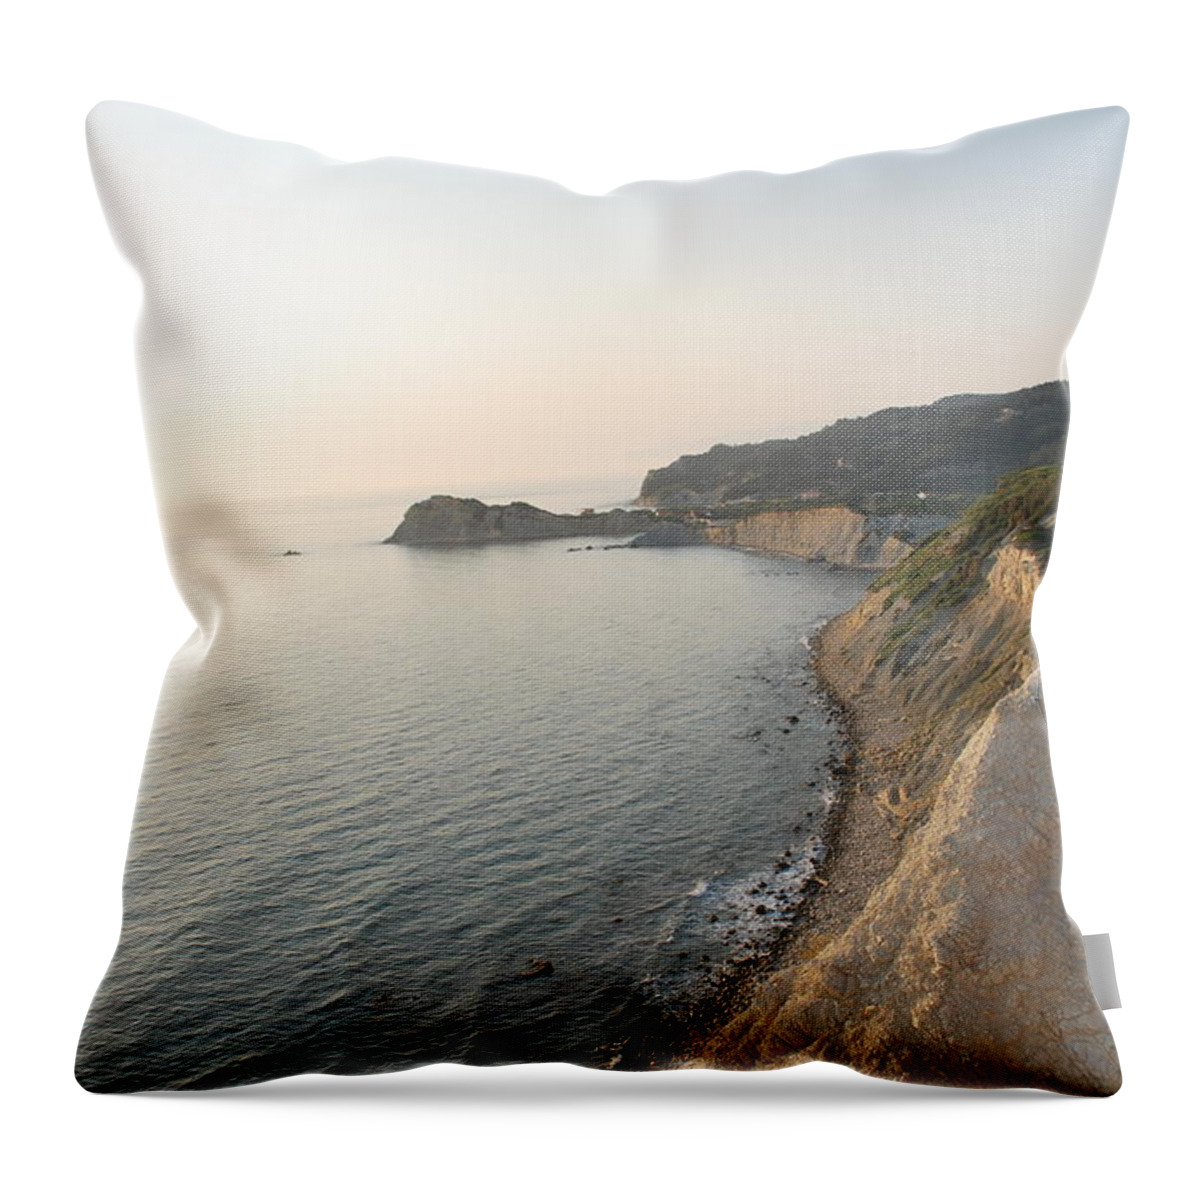 Sunset Throw Pillow featuring the photograph Sunset Gourna by George Katechis